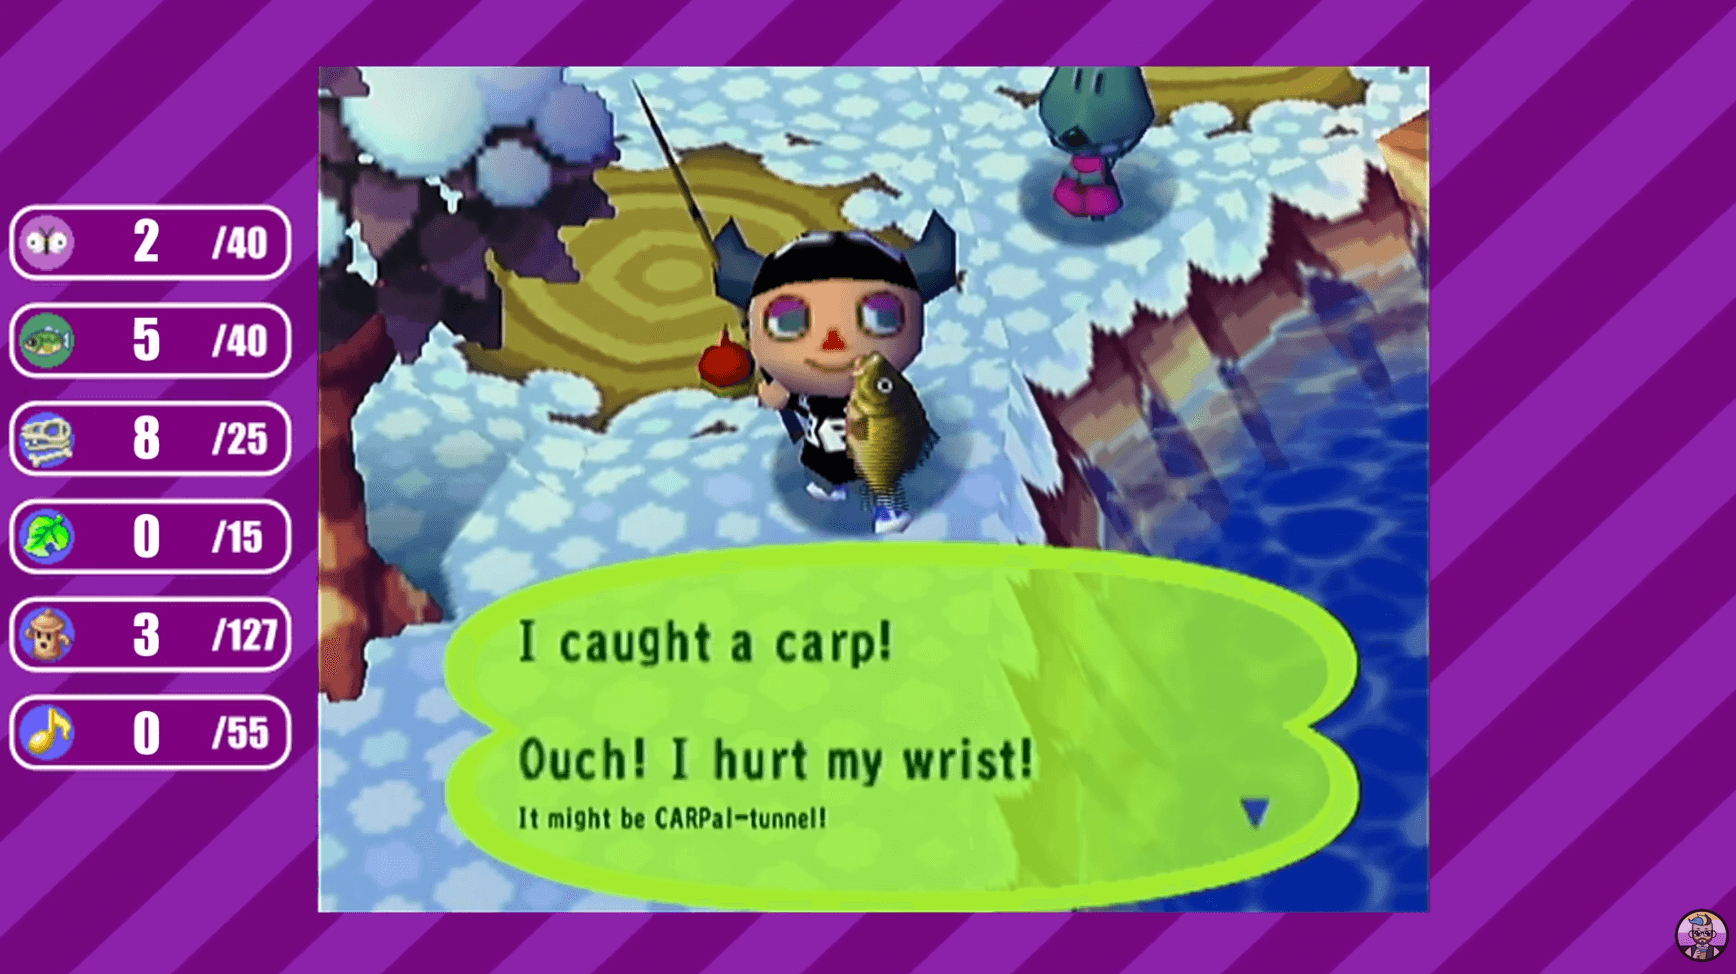 Image description: A screenshot of the game Animal Crossing. A human character is holding up a fish they caught and saying: I caught a carp! Ouch! I hurt my wrist! It might be CARPal-tunnel!